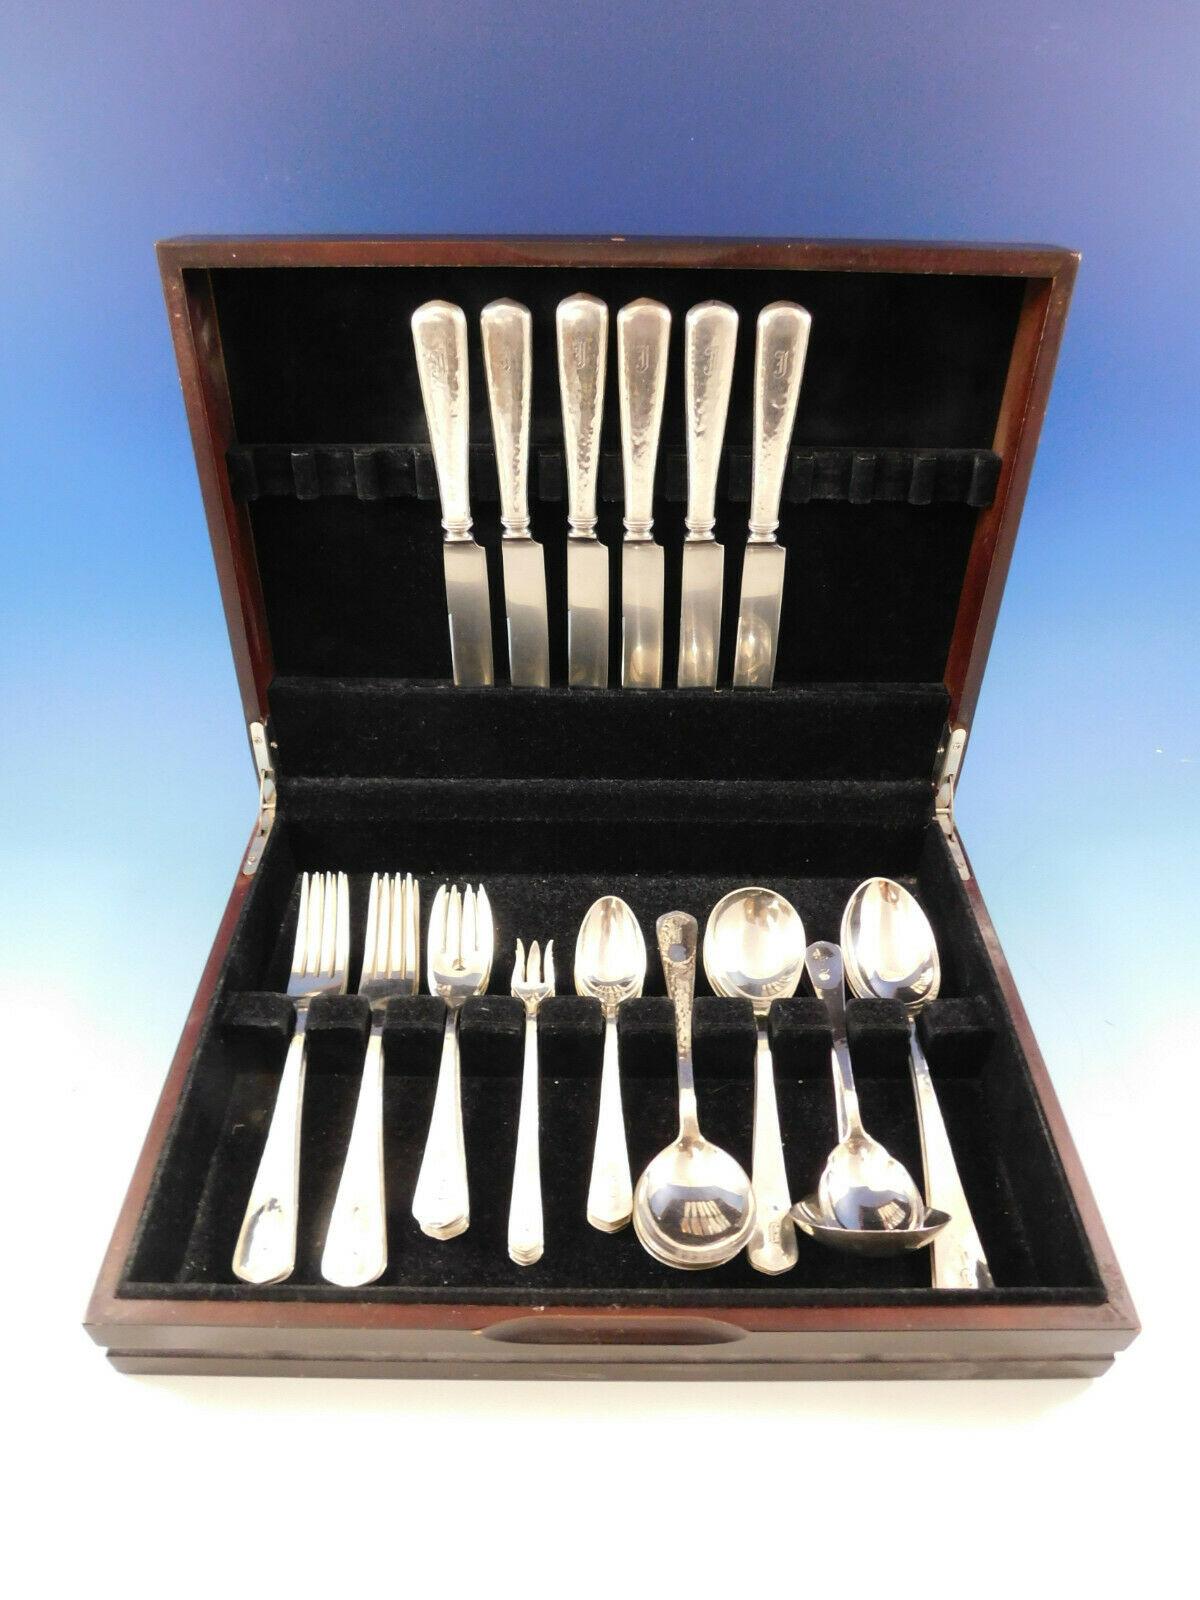 Lebolt (pattern #1) handwrought Chicago Arts & Crafts sterling silver flatware set - 40 pieces. This set is beautifully hand-hammered. This set includes:

6 dinner size knives, 9 5/8